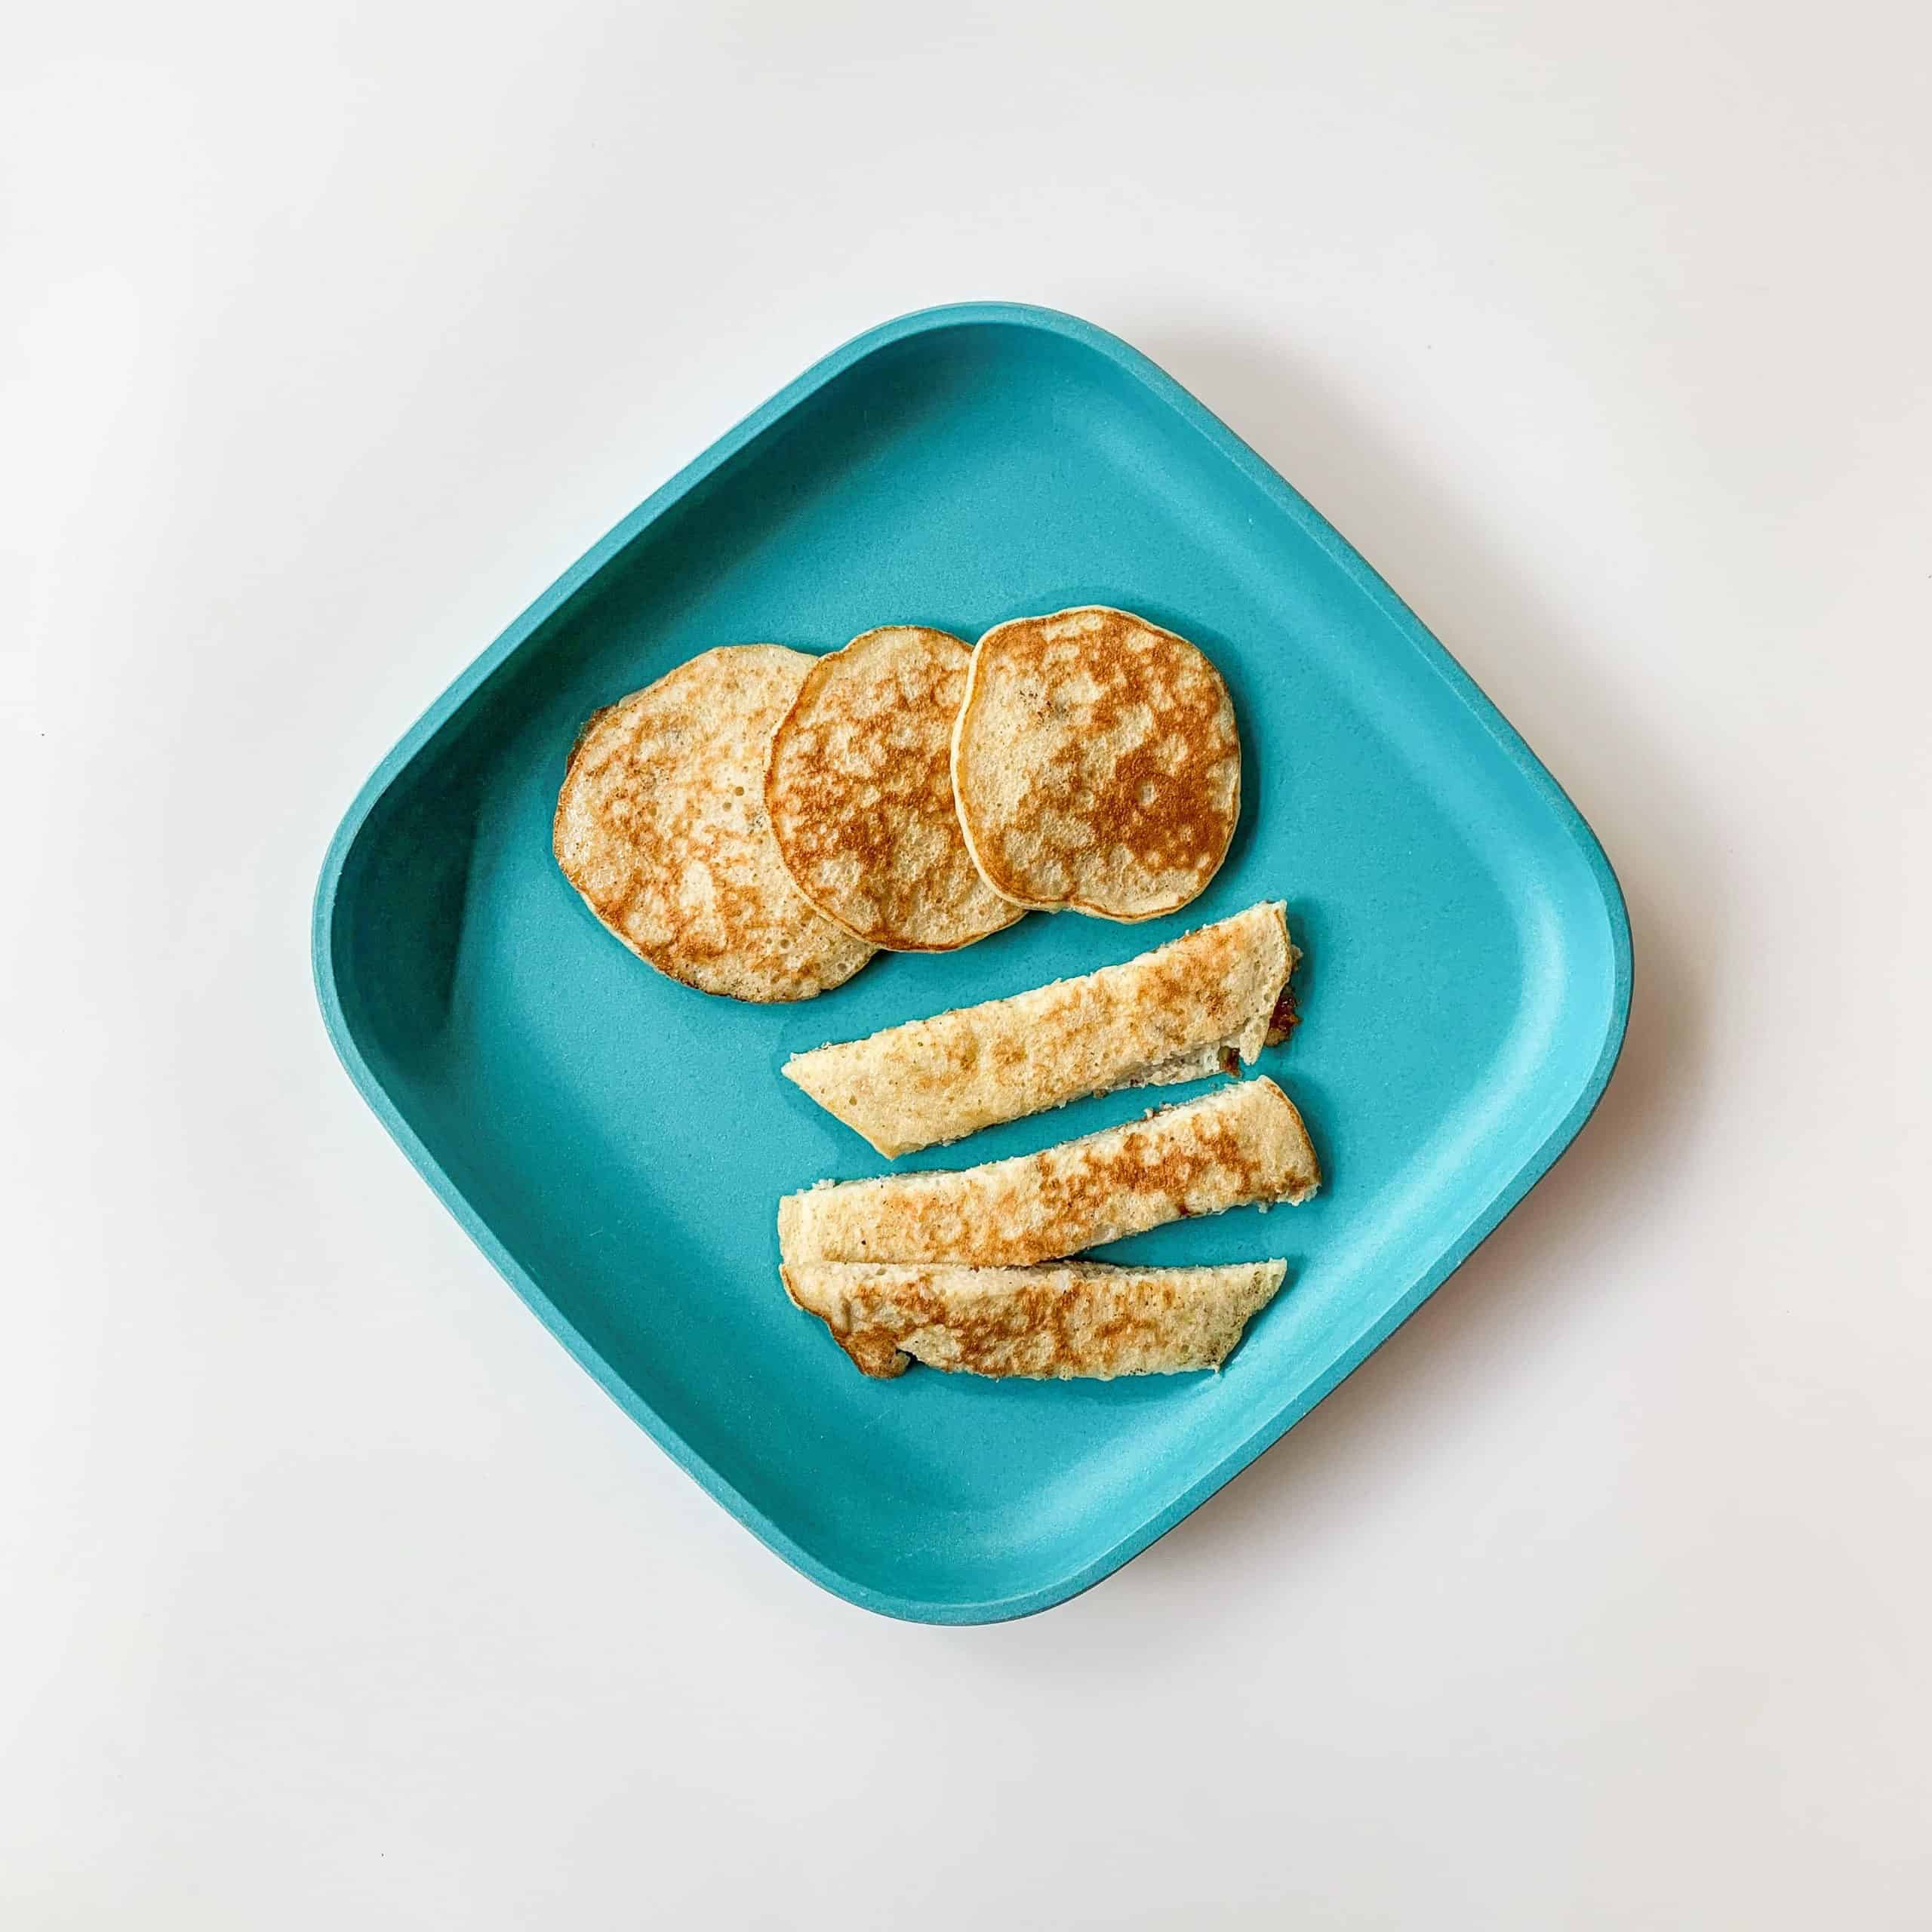 Banana pancakes cut into strips on a blue plate